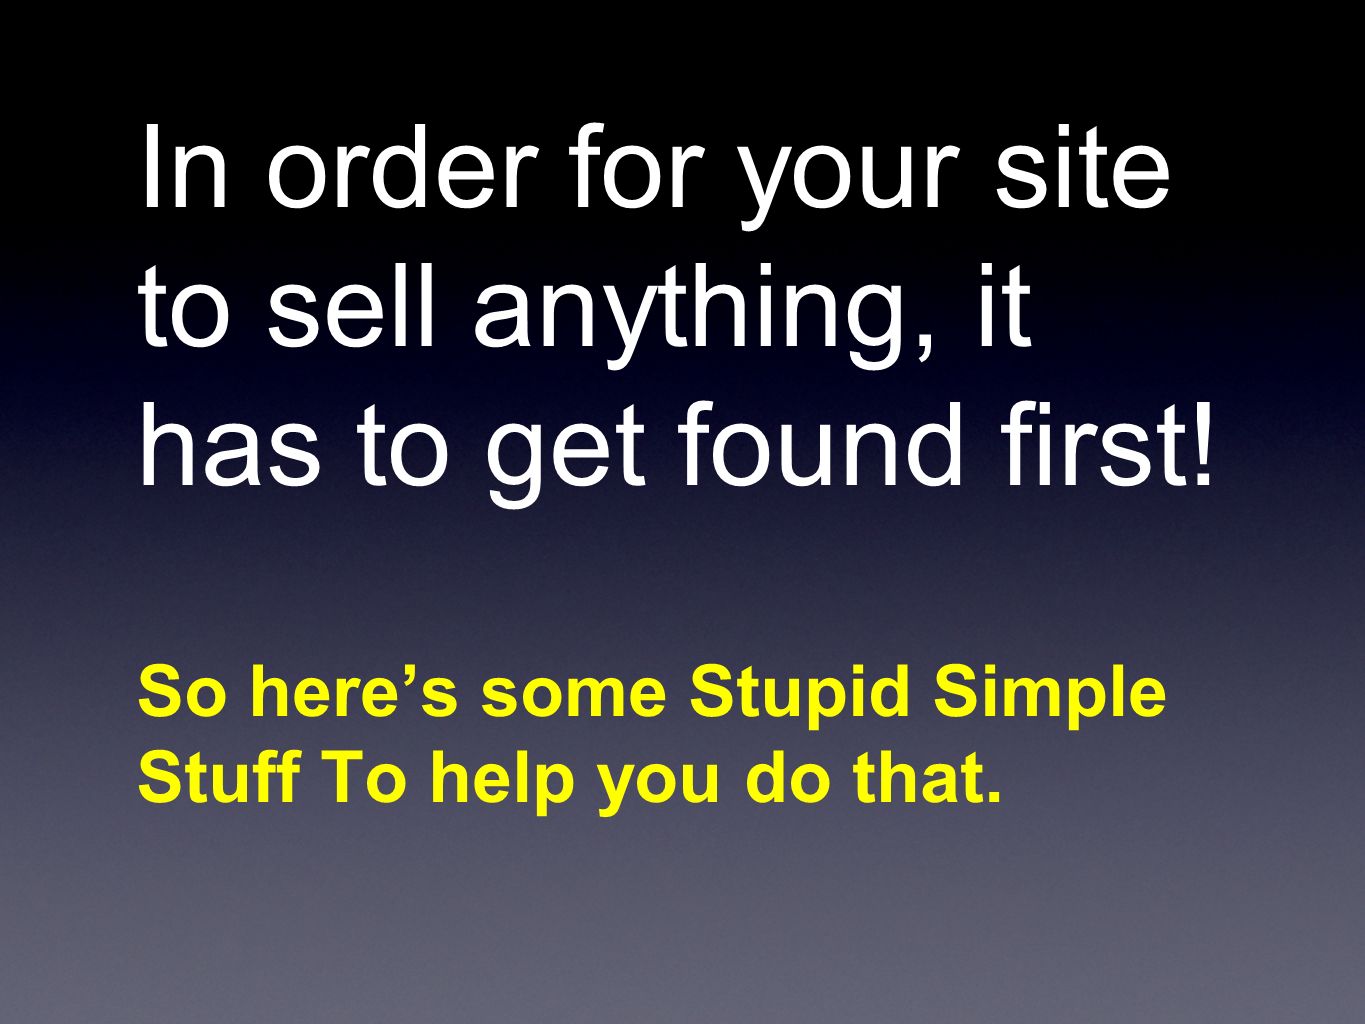 In order for your site to sell anything, it has to get found first.